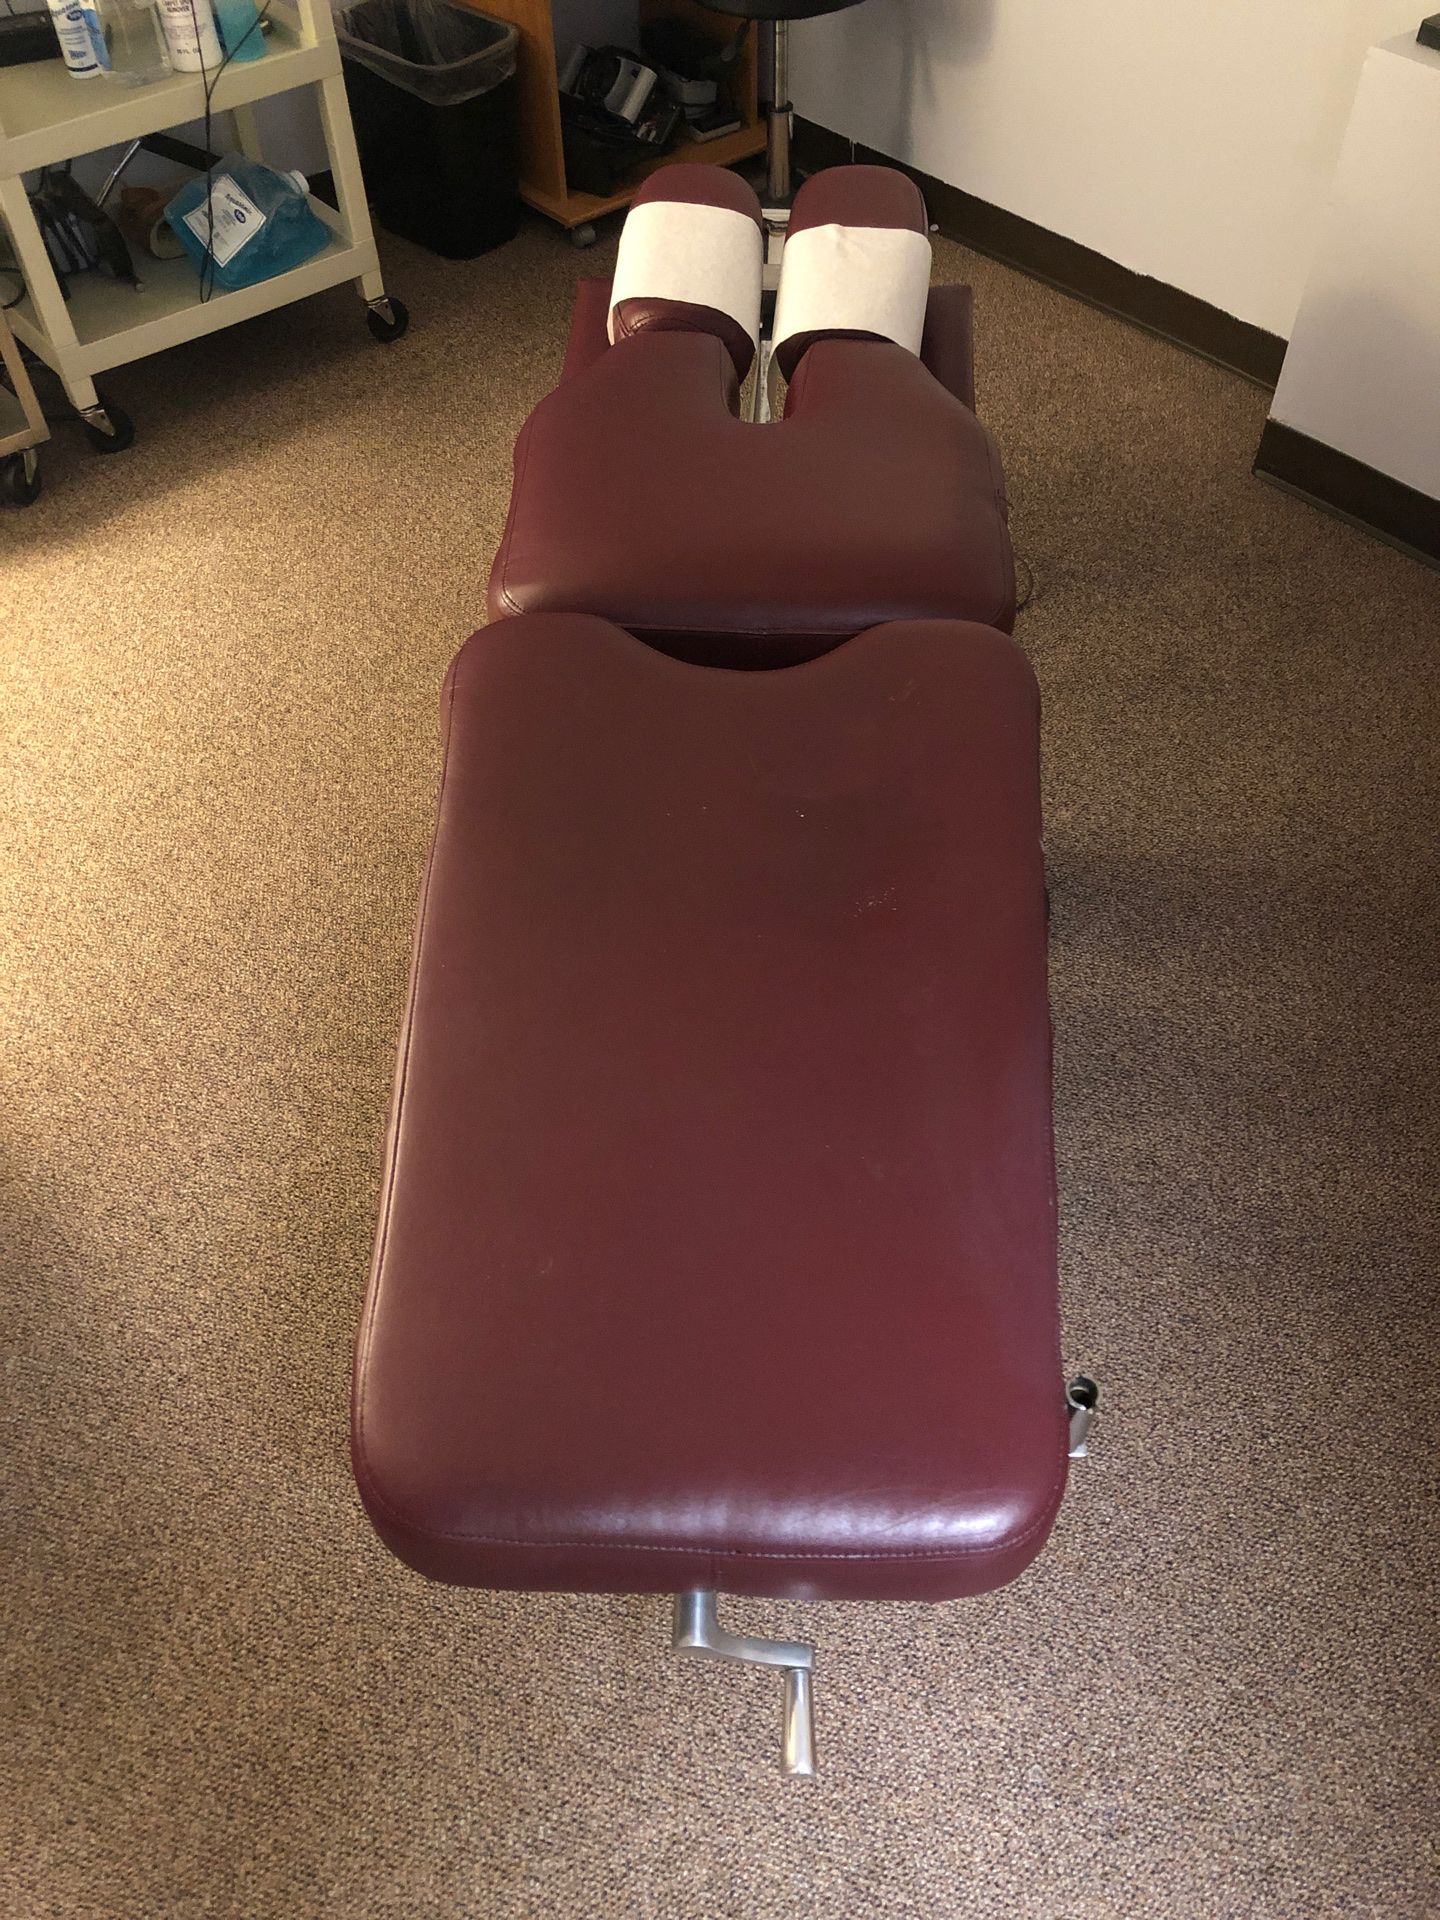 Flexion/distraction table with elevation